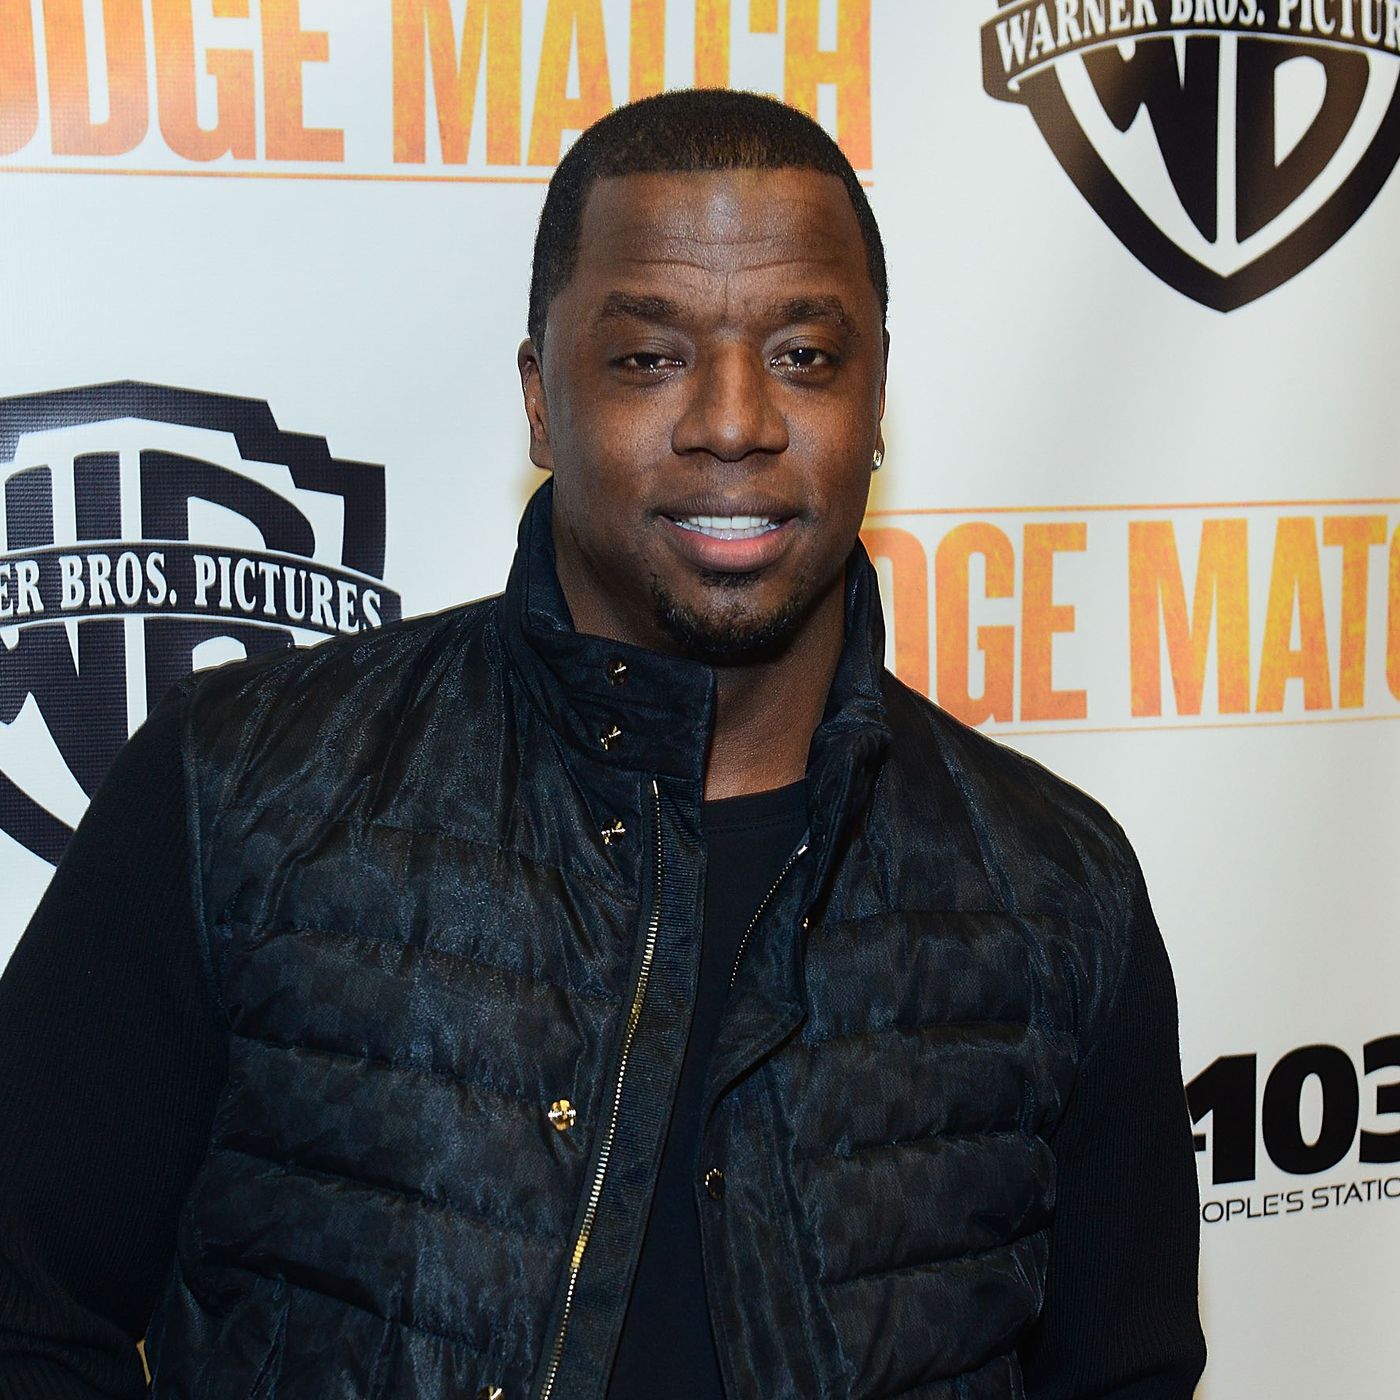 After Naked Video Leak, Kordell Stewart Re-Confirms He Doesn'T 'Mess With No Dudes' - Outsports